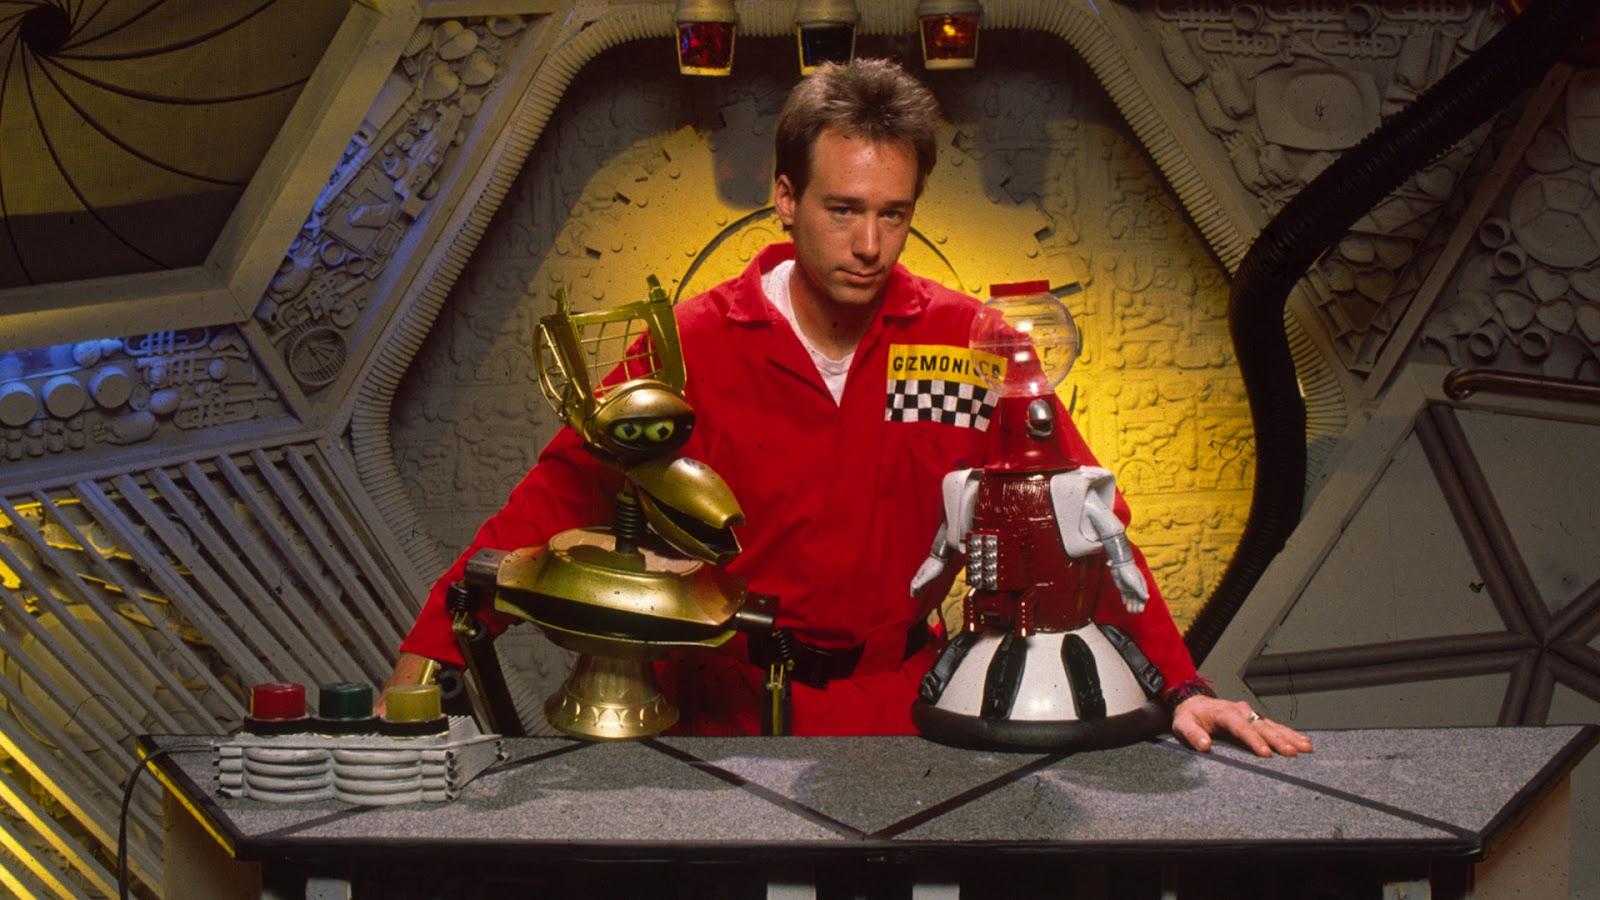 Kickstart This: Bring Back MST3K (Mystery Science Theater 3000)